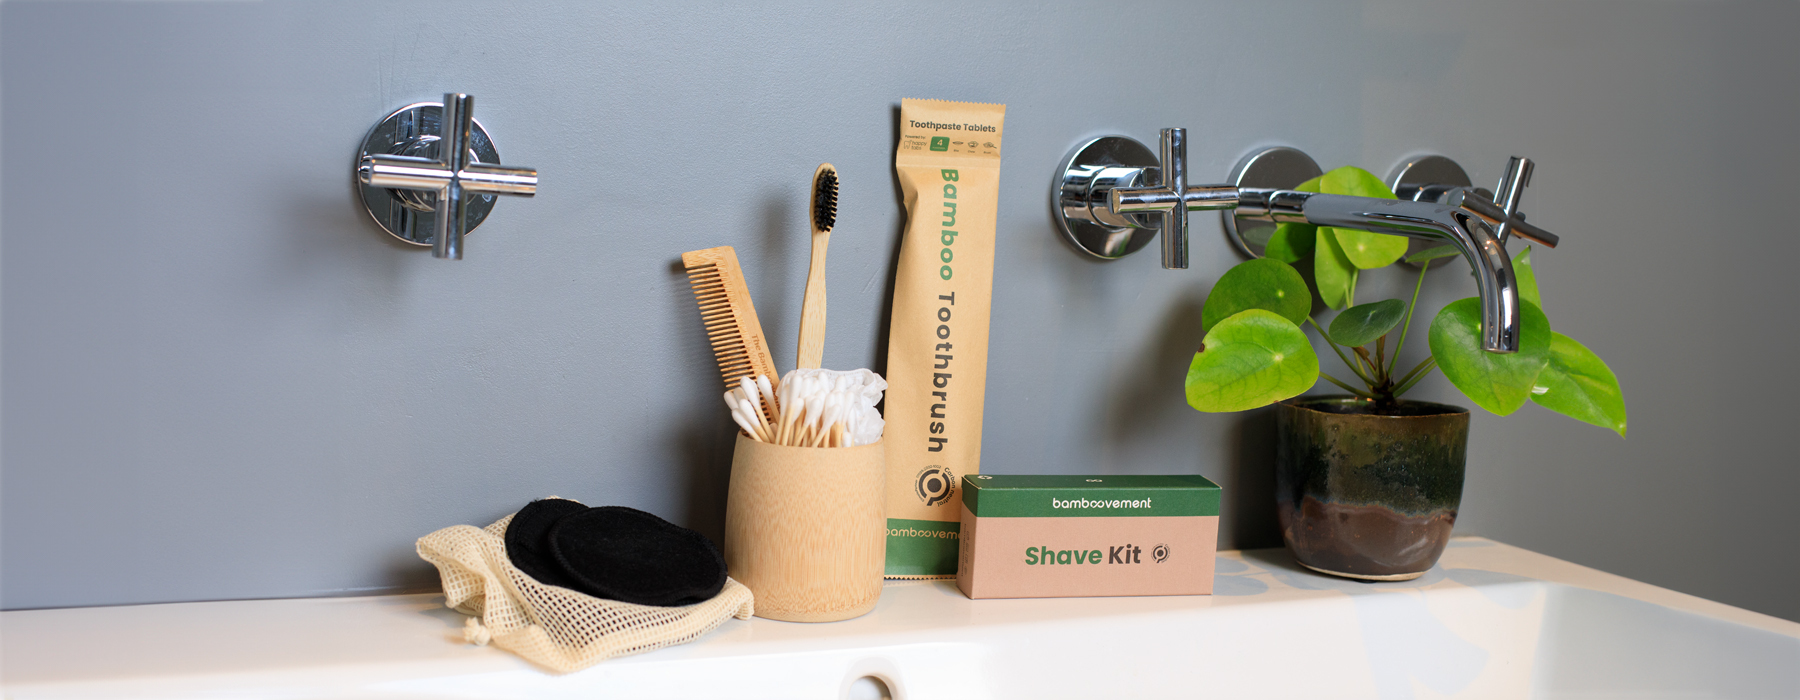 Bamboo Amenity Kits / Hotel Personal Care Products / Sustainable Guest Room Amenities